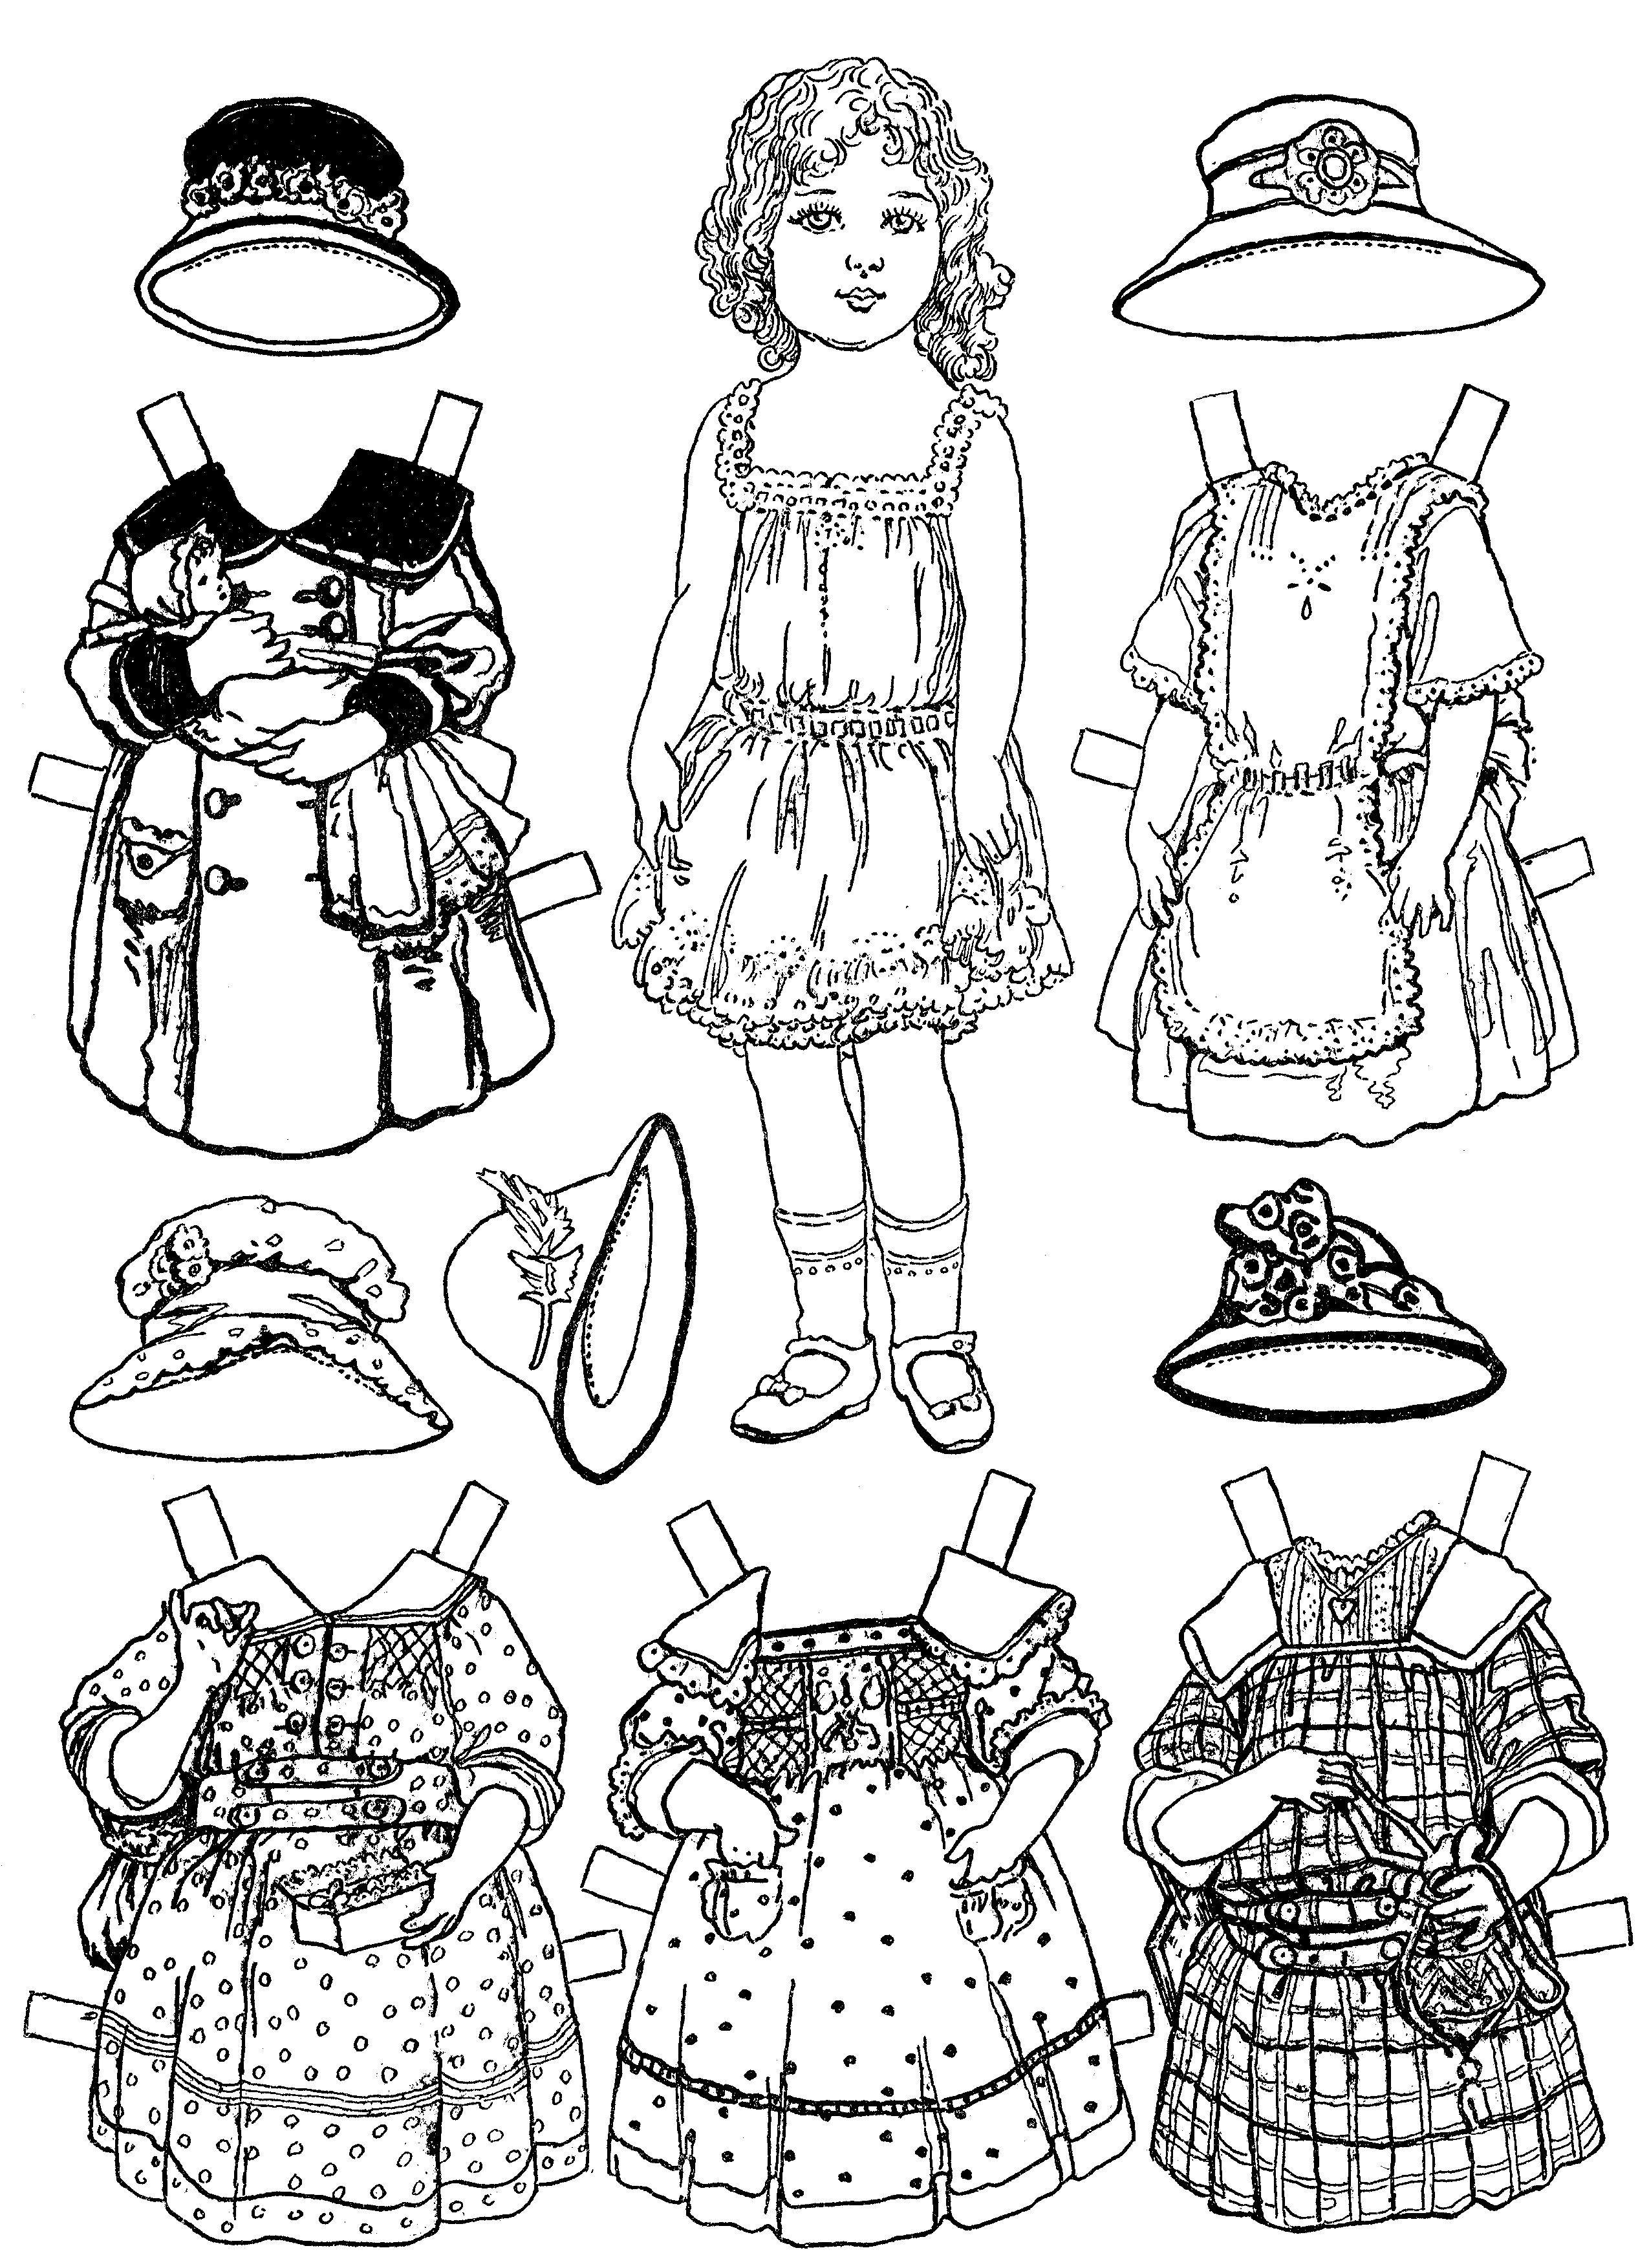 Free Printable Paper Doll Coloring Pages For Kids | Paper Dolls - Free Printable Paper Doll Coloring Pages